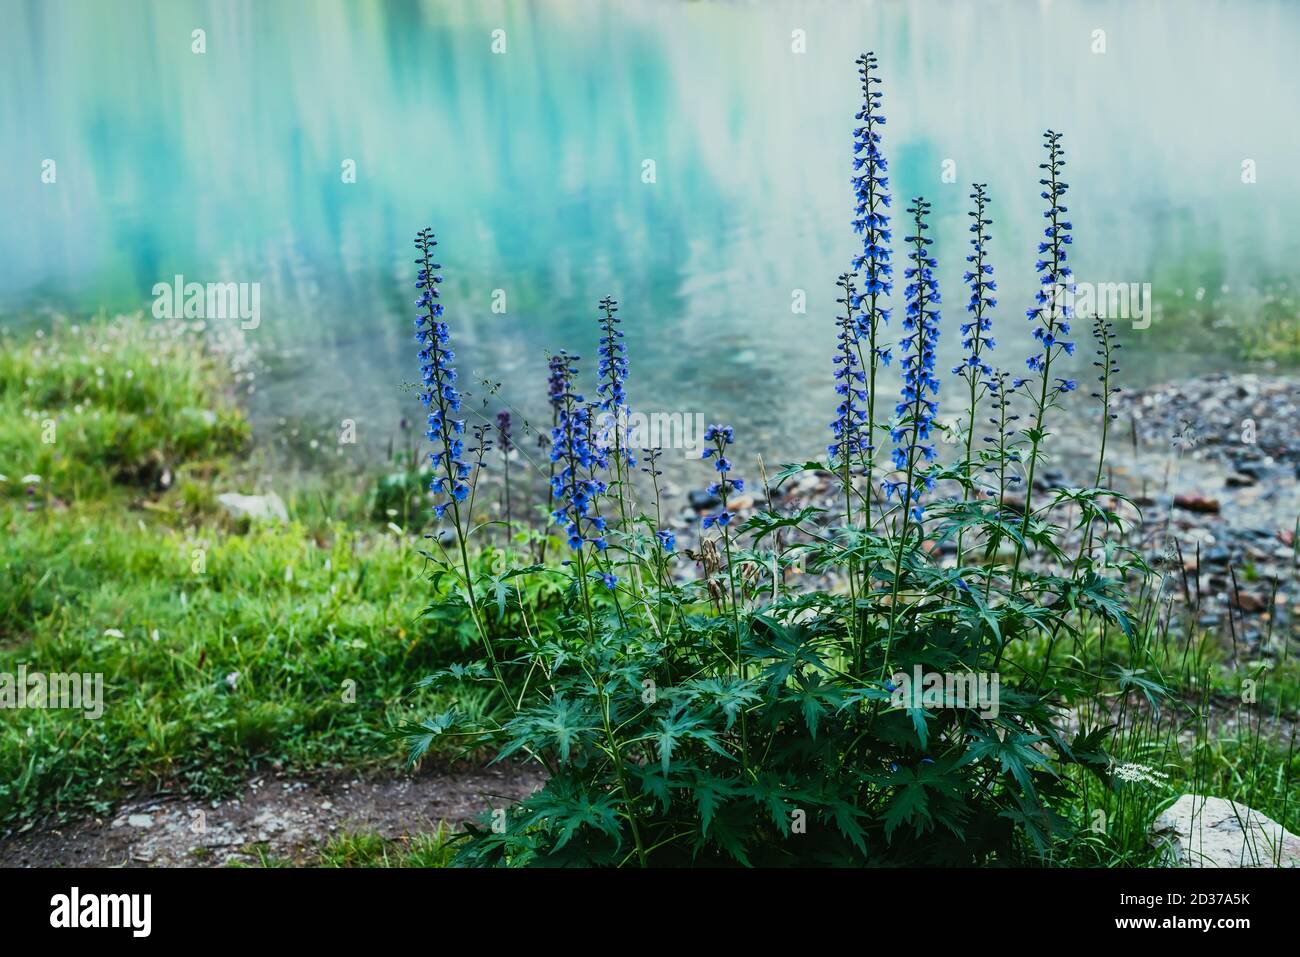 Many amazing blue flowers of larkspur grows on shore of mountain lake with clear azure water. Scenic nature background with beautiful larkspur flowers Stock Photo